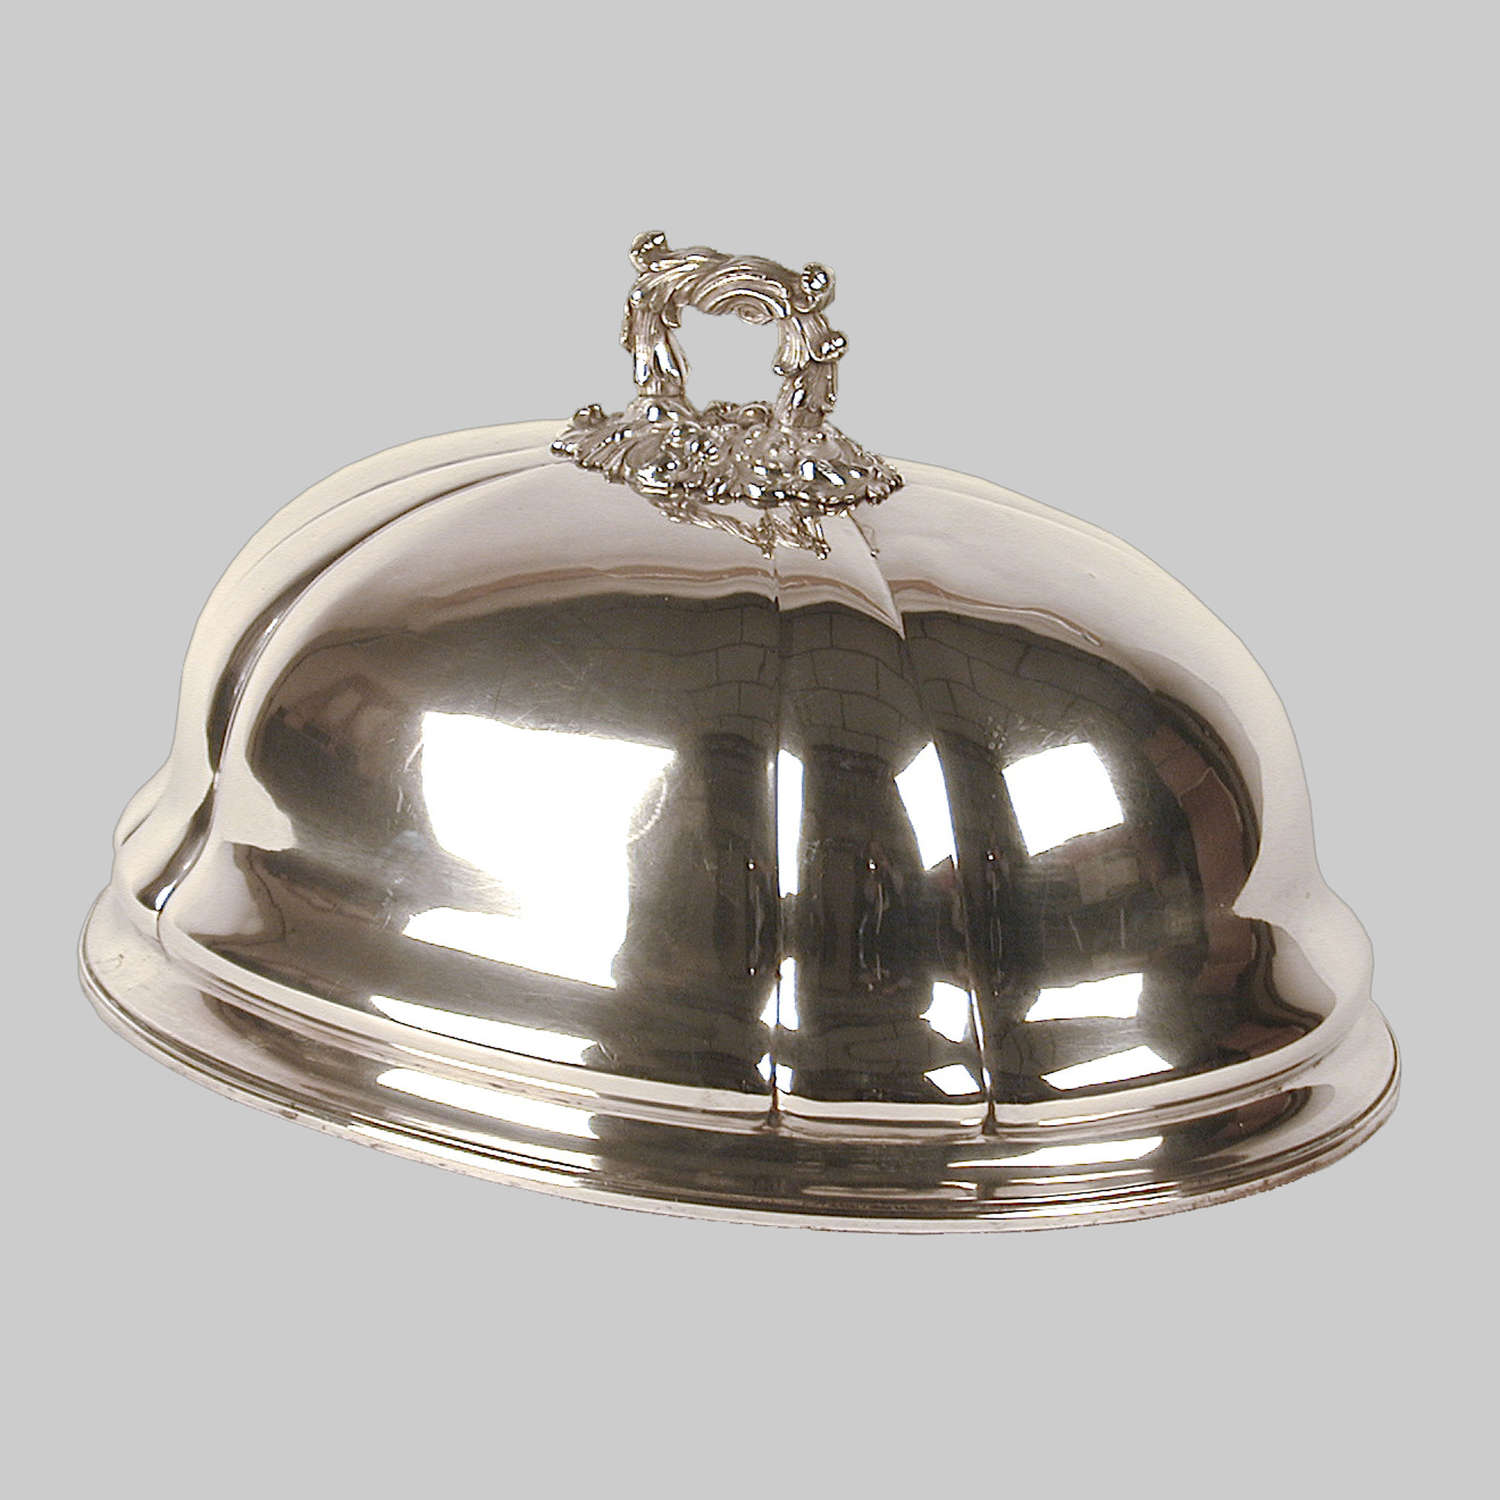 19th century silver plated charger cover